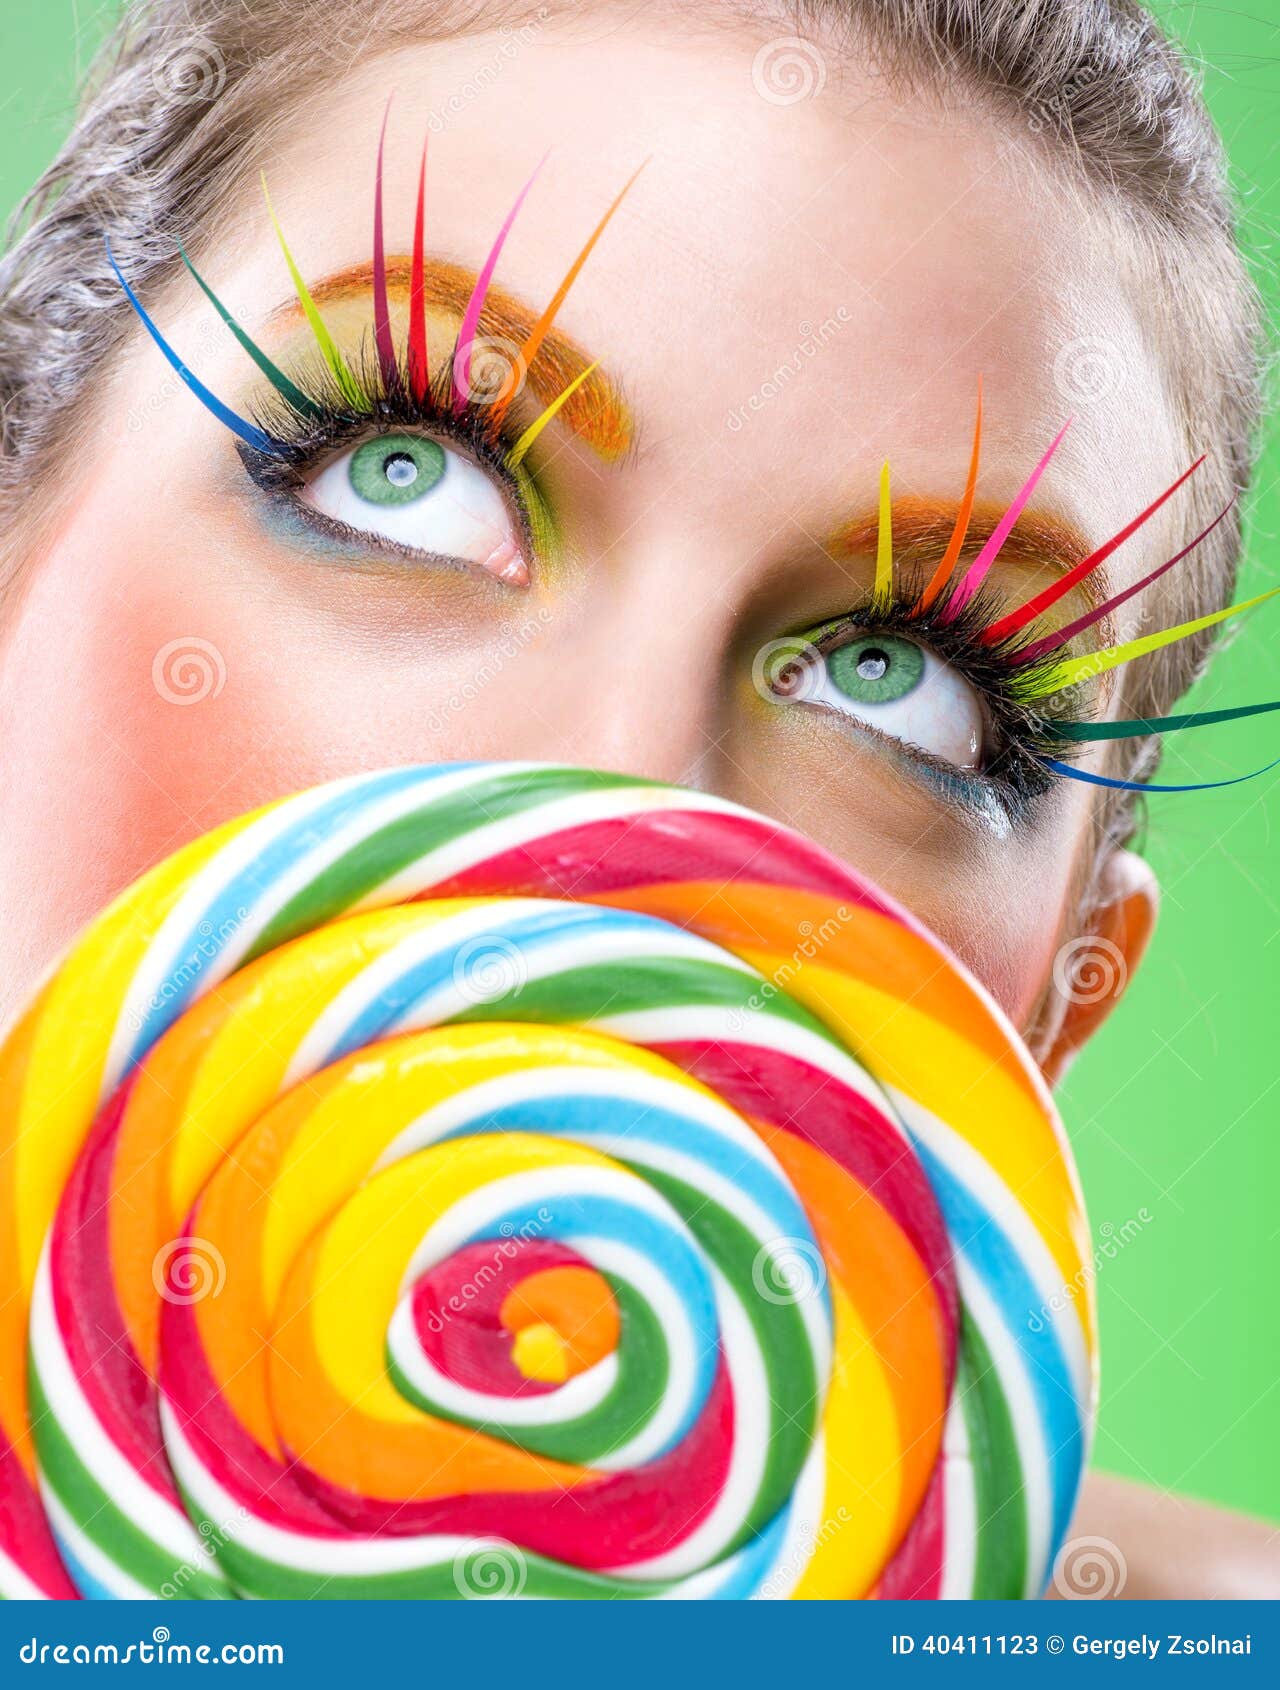 extremely beauty colorful lollipop, comes with matching makeup